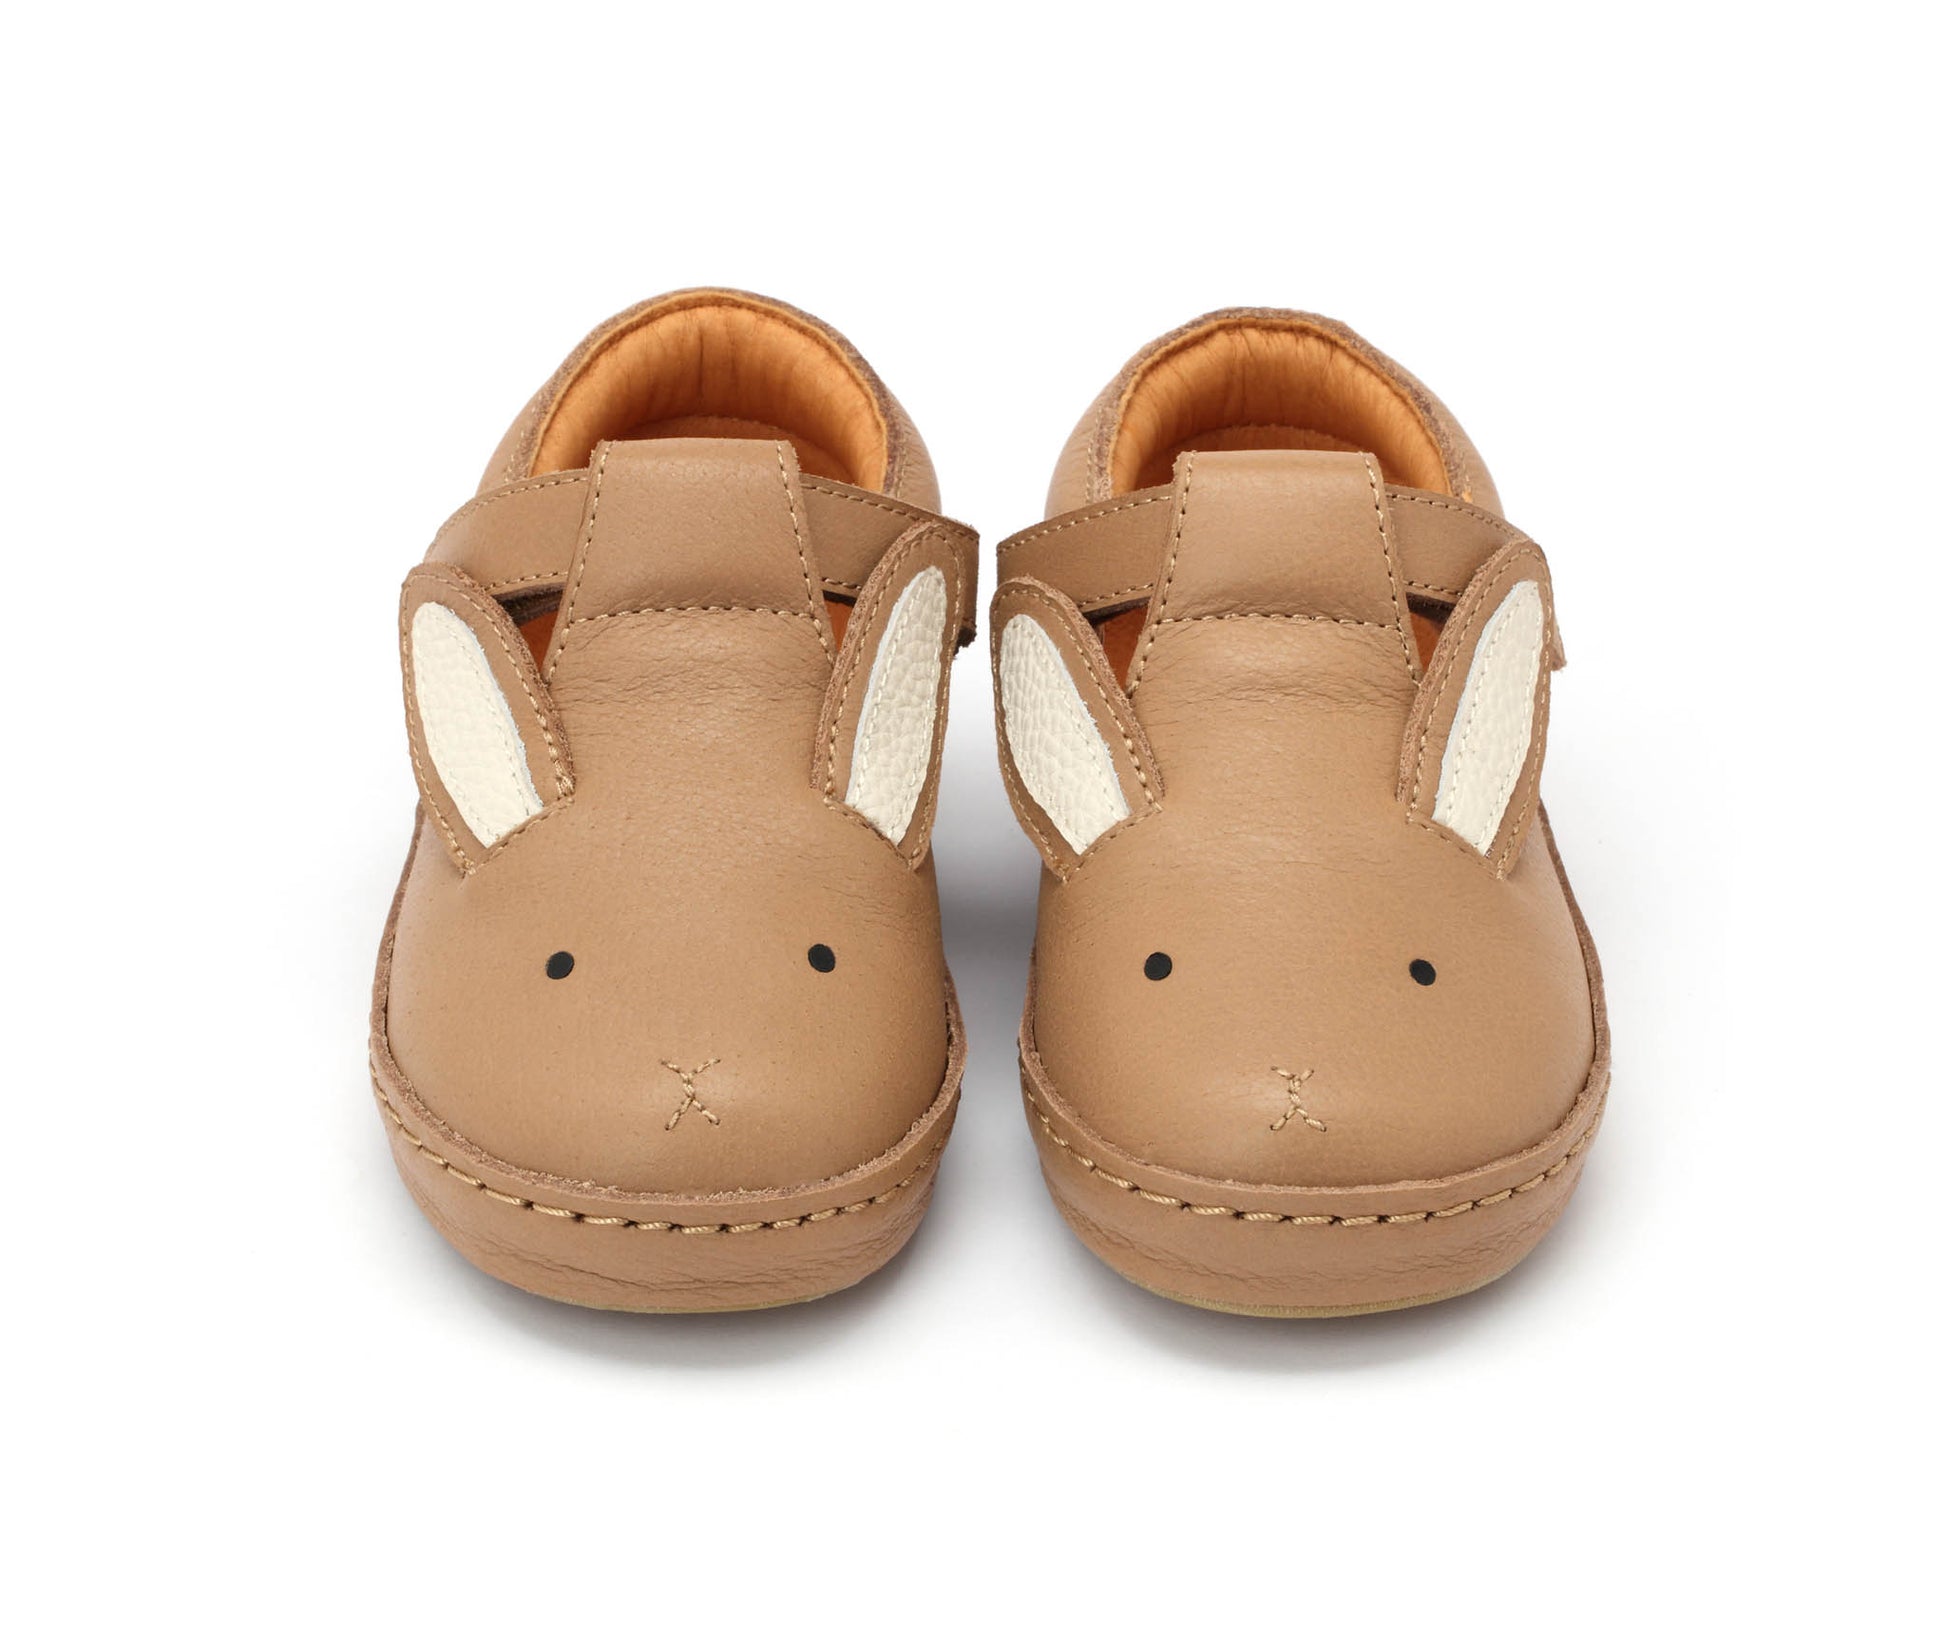 Donsje - Schuhe "Xan Classic  Bunny" | taupe leather - Leja Concept Store